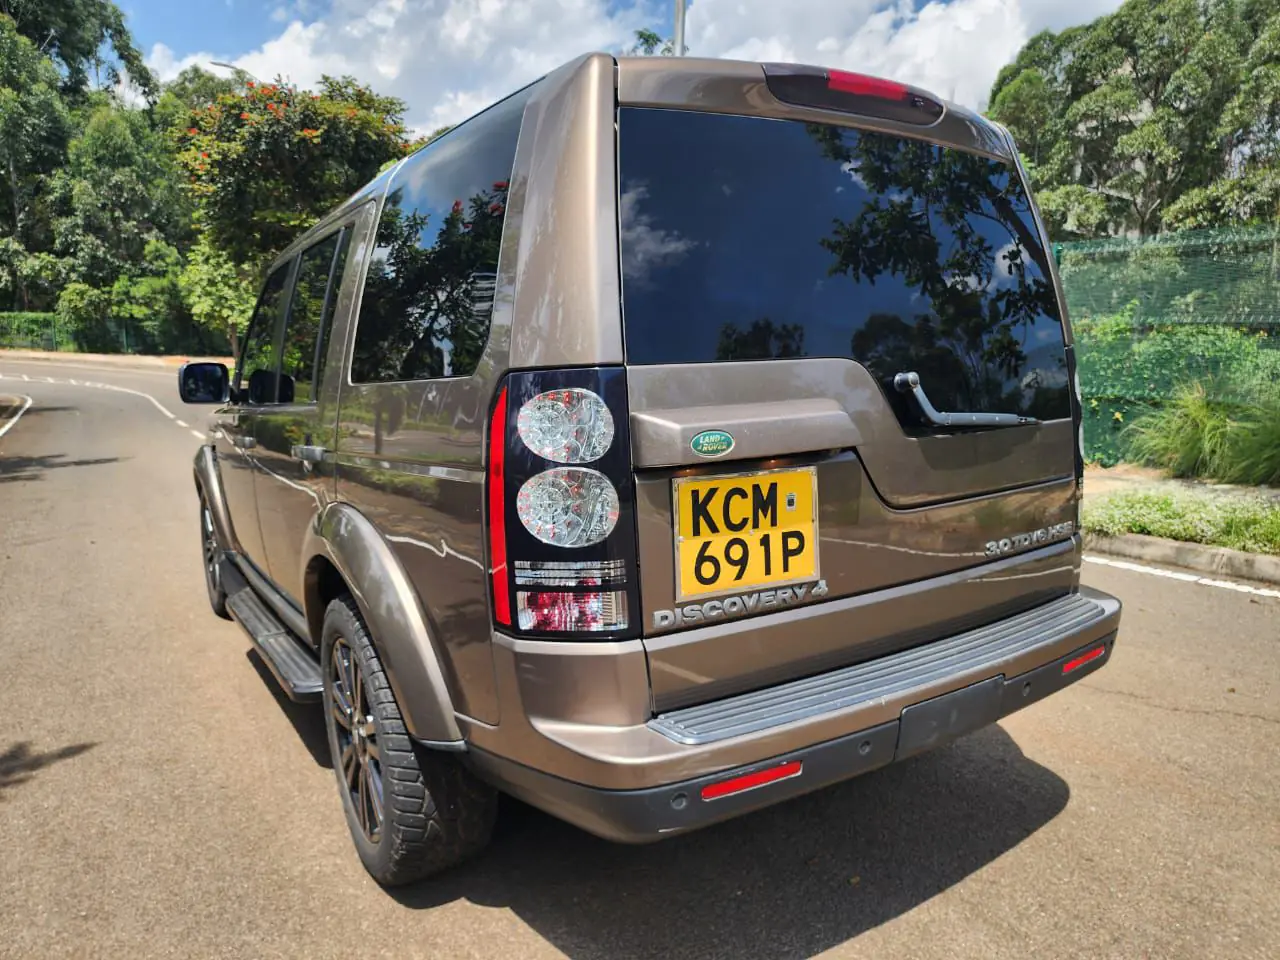 Land Rover Discovery 4 HSE 🔥 Quick sale You 40% Deposit Pay Trade in Ok EXCLUSIVE